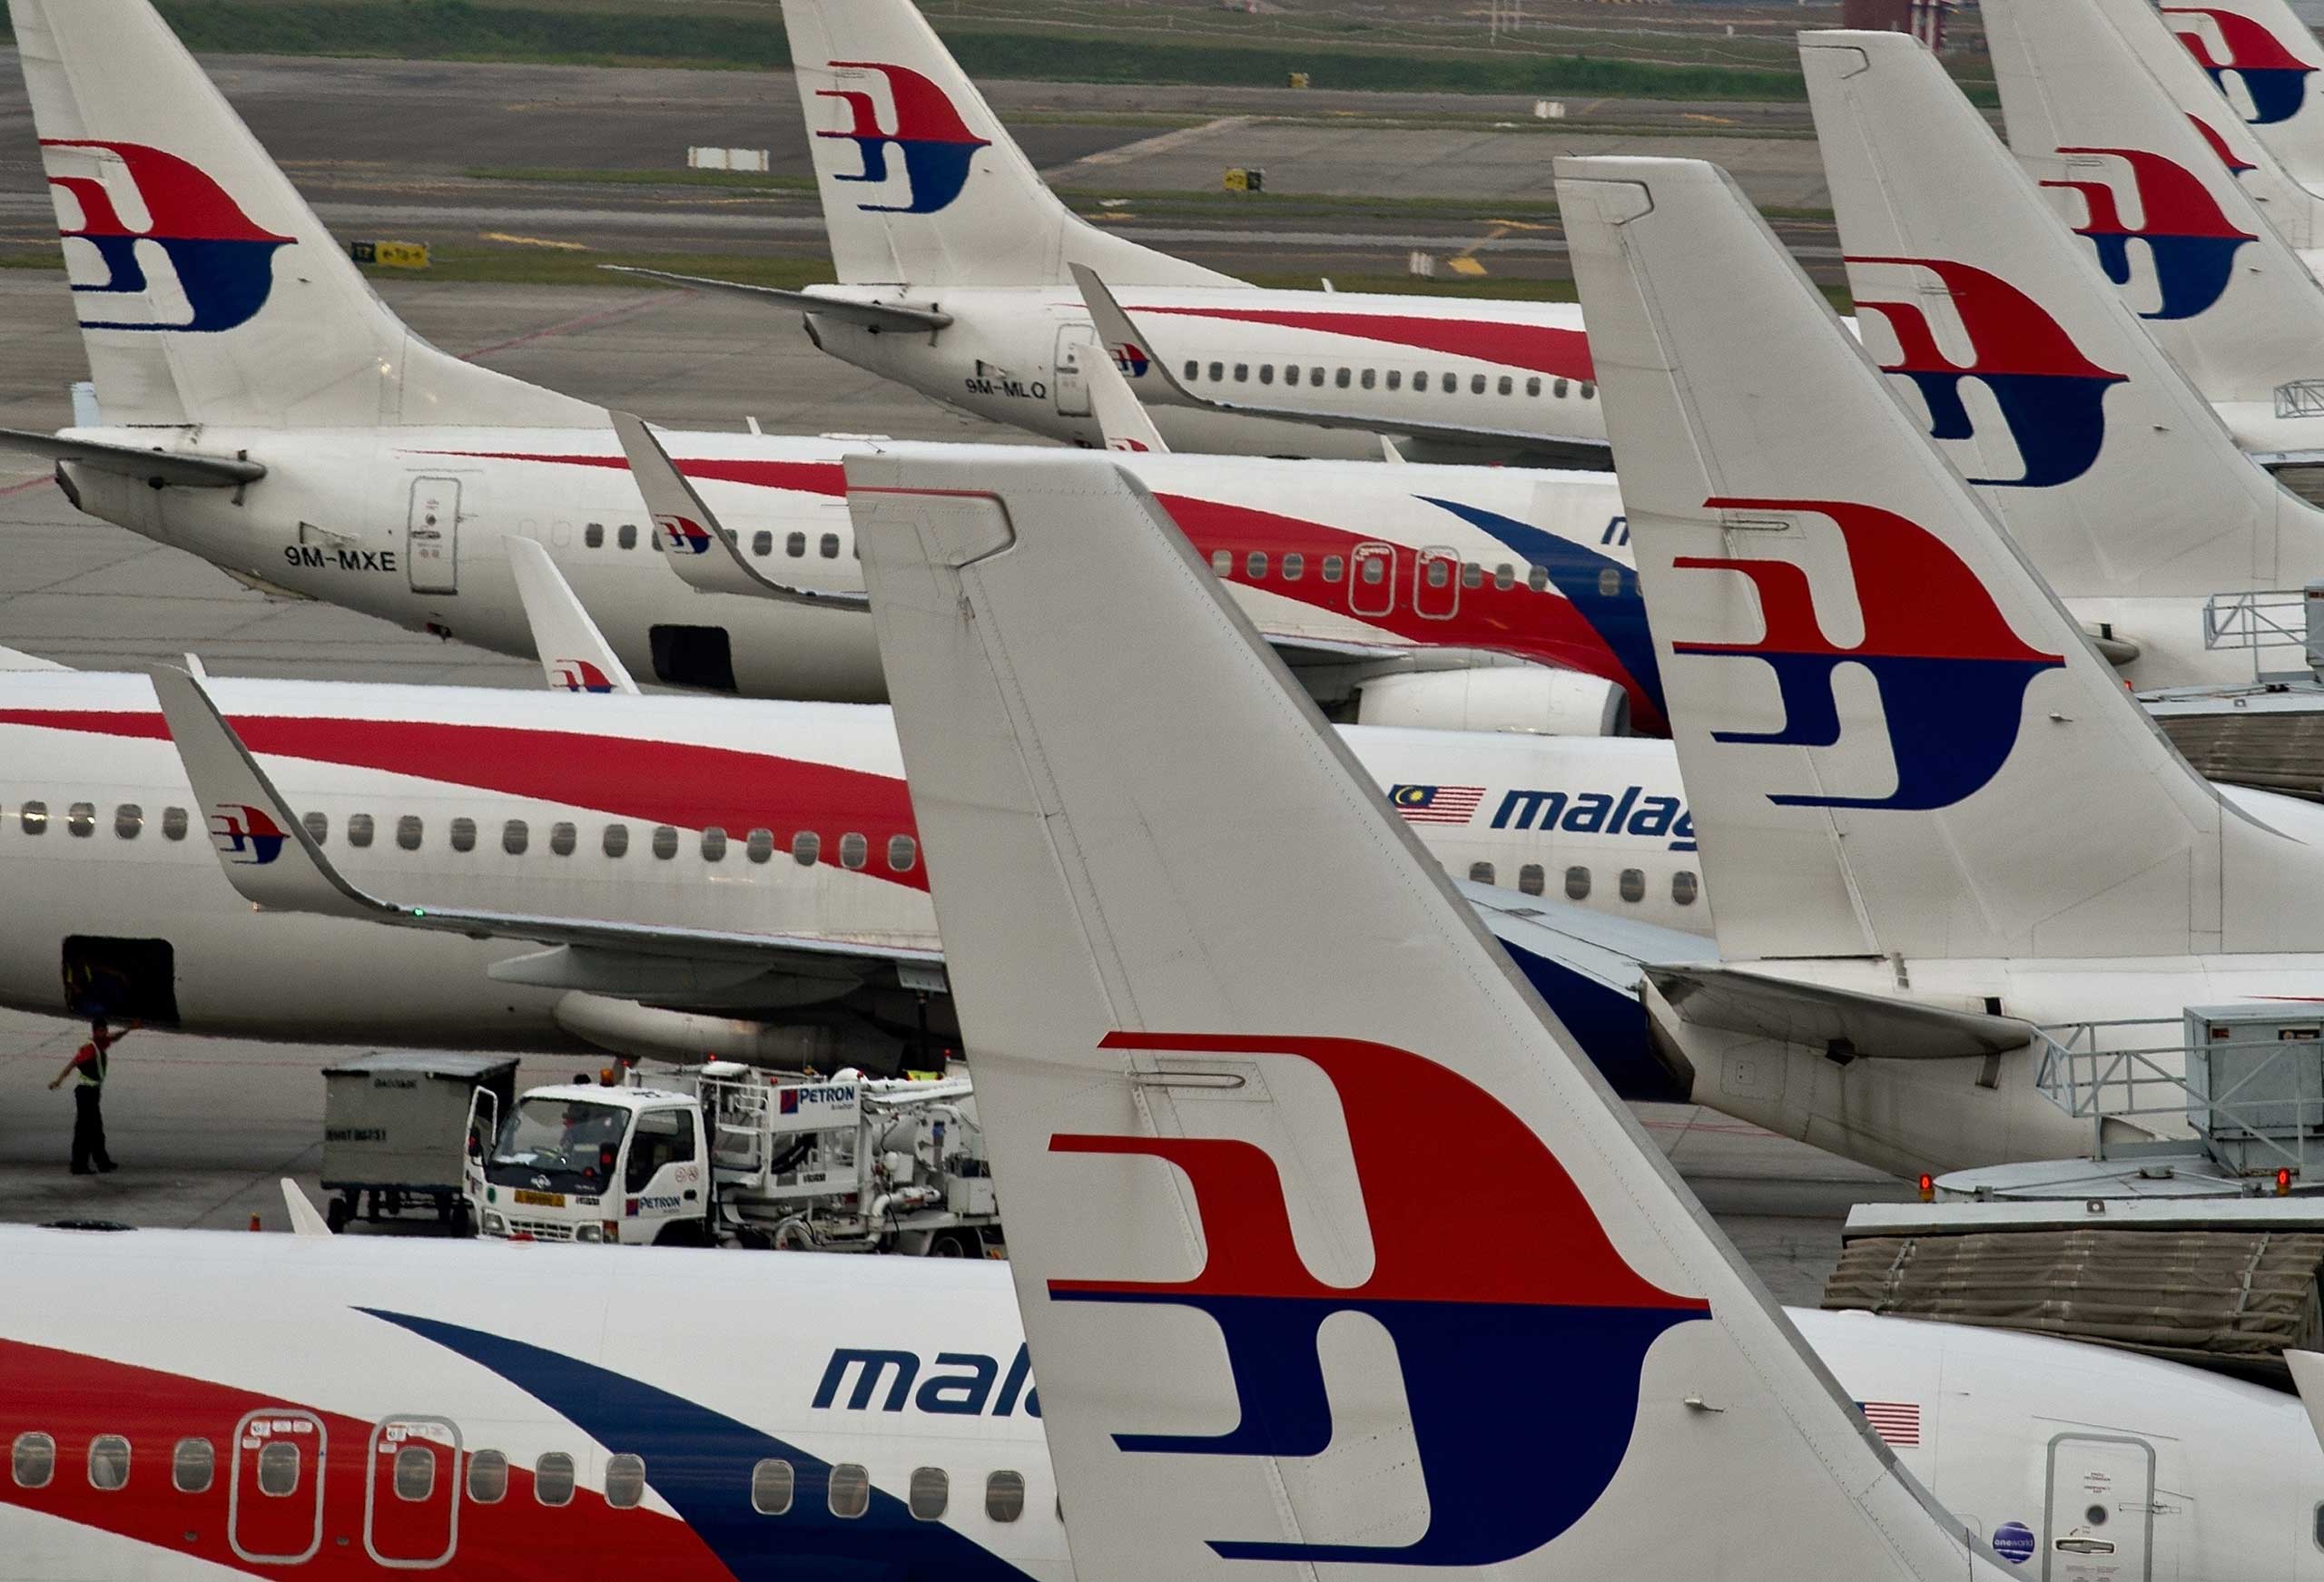 Airport groundstaff walk past Malaysia Airlines planes parked on the tarmac at the Kuala Lumpur International Airport in Sepang on June 17, 2014. (Manan Vatsyana—AFP/Getty Images)